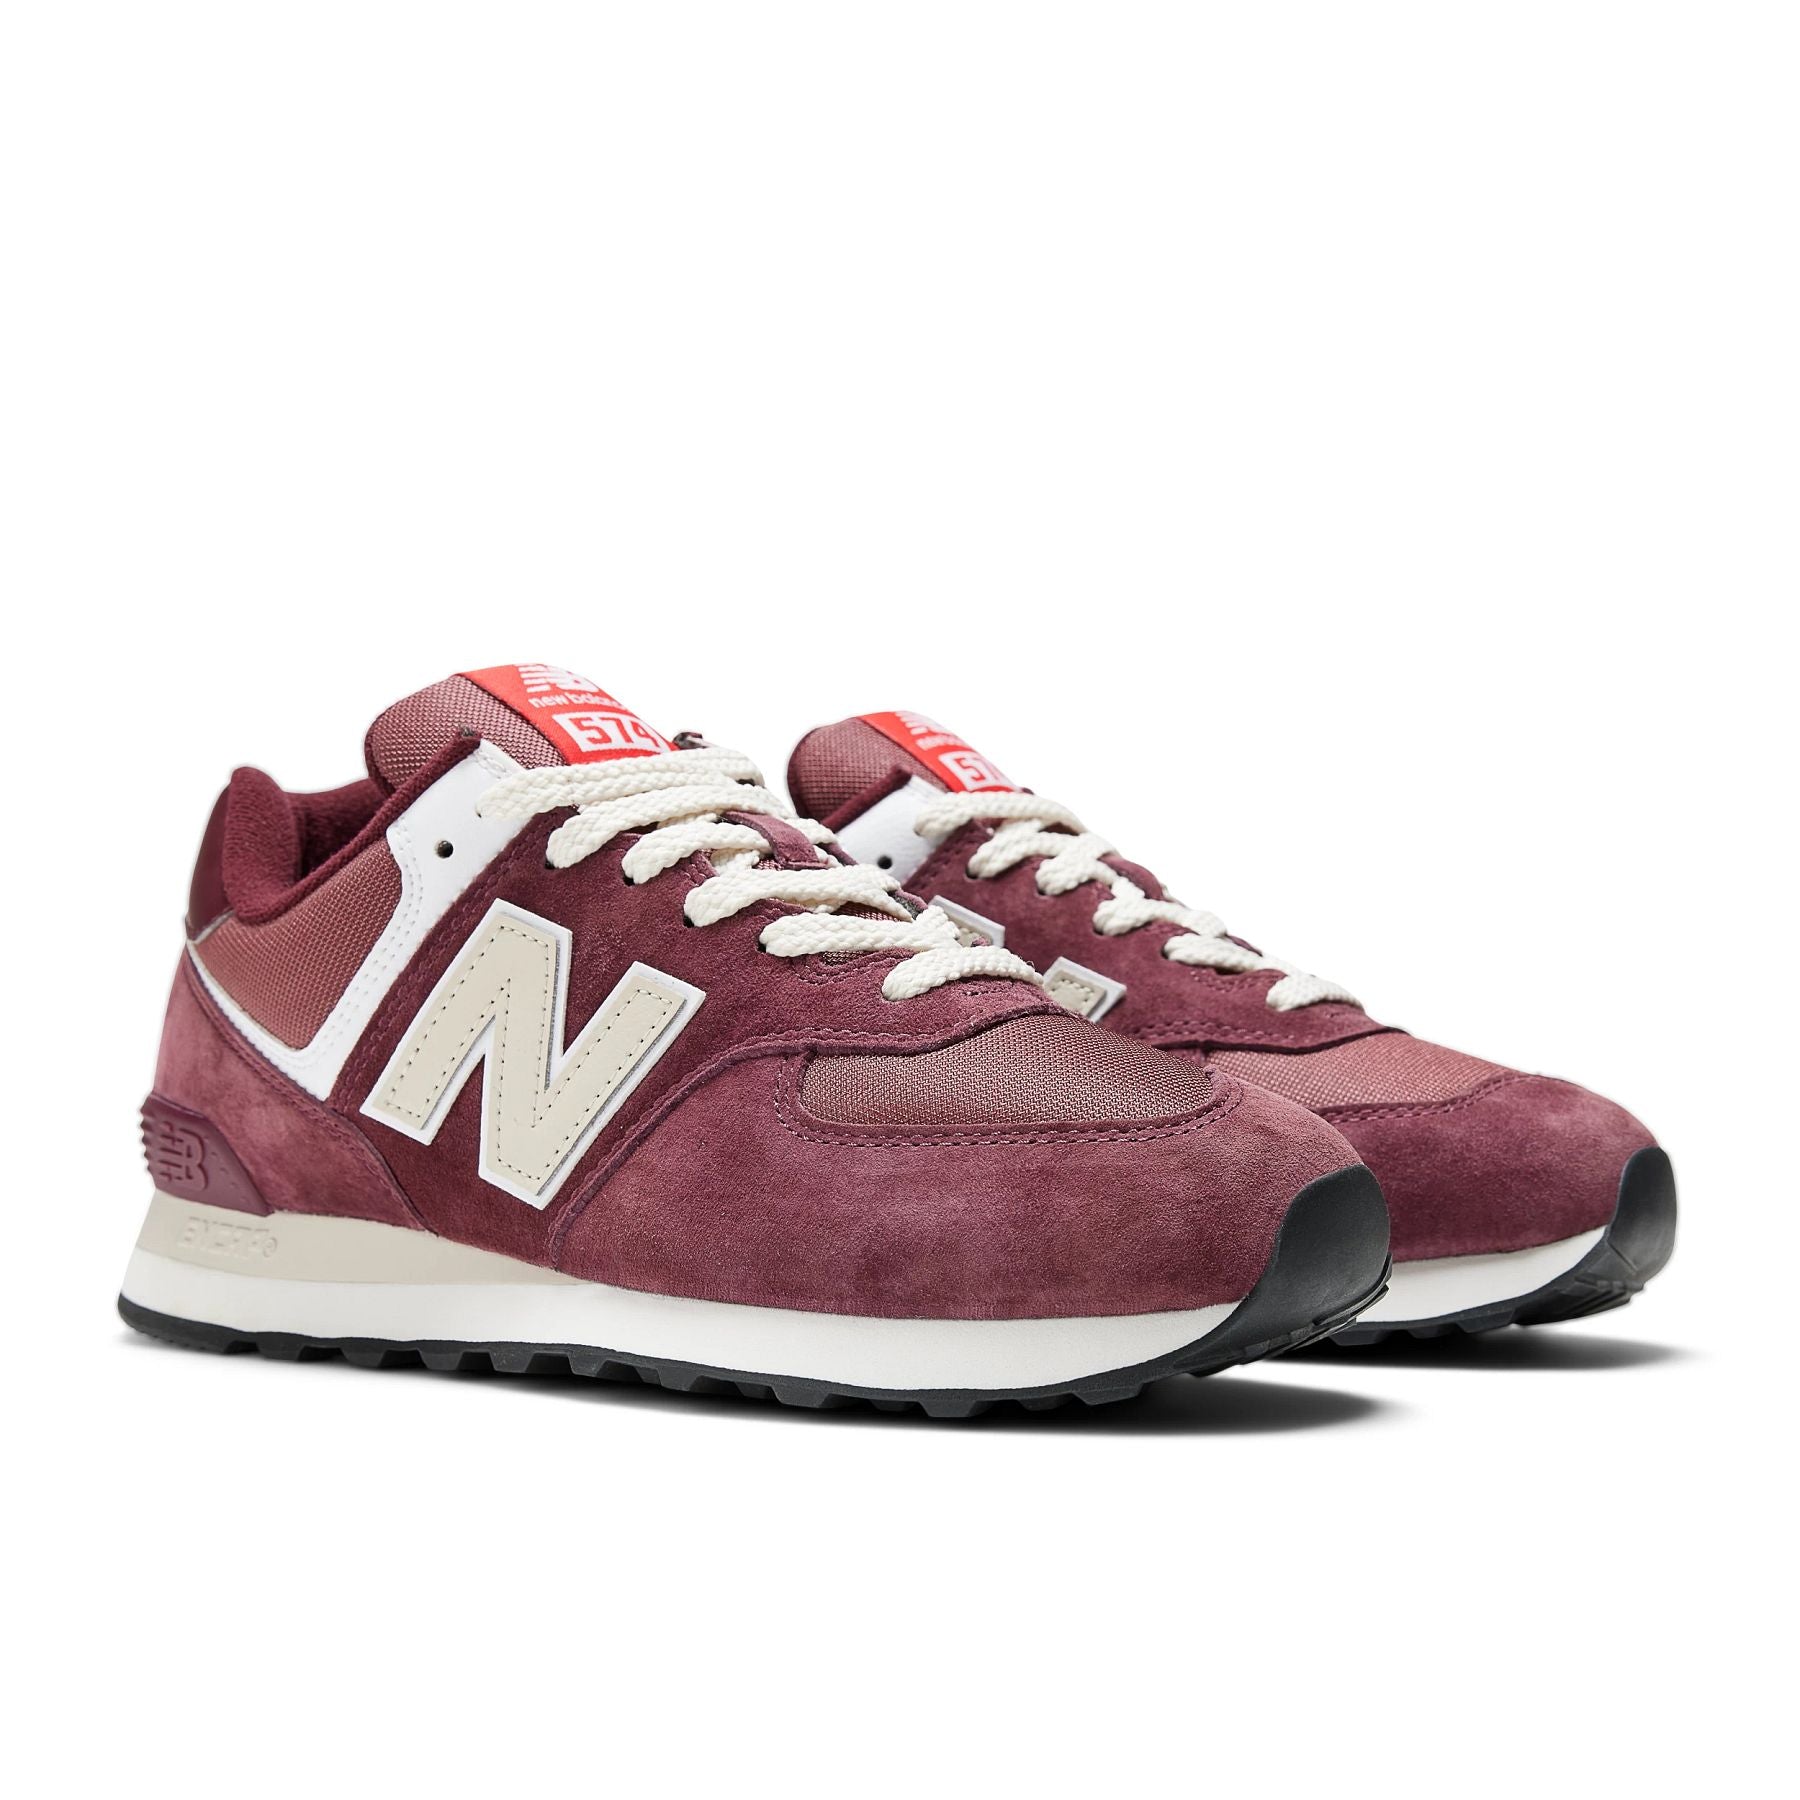 Front angle view of the Men's 574 in Maroon/Grey